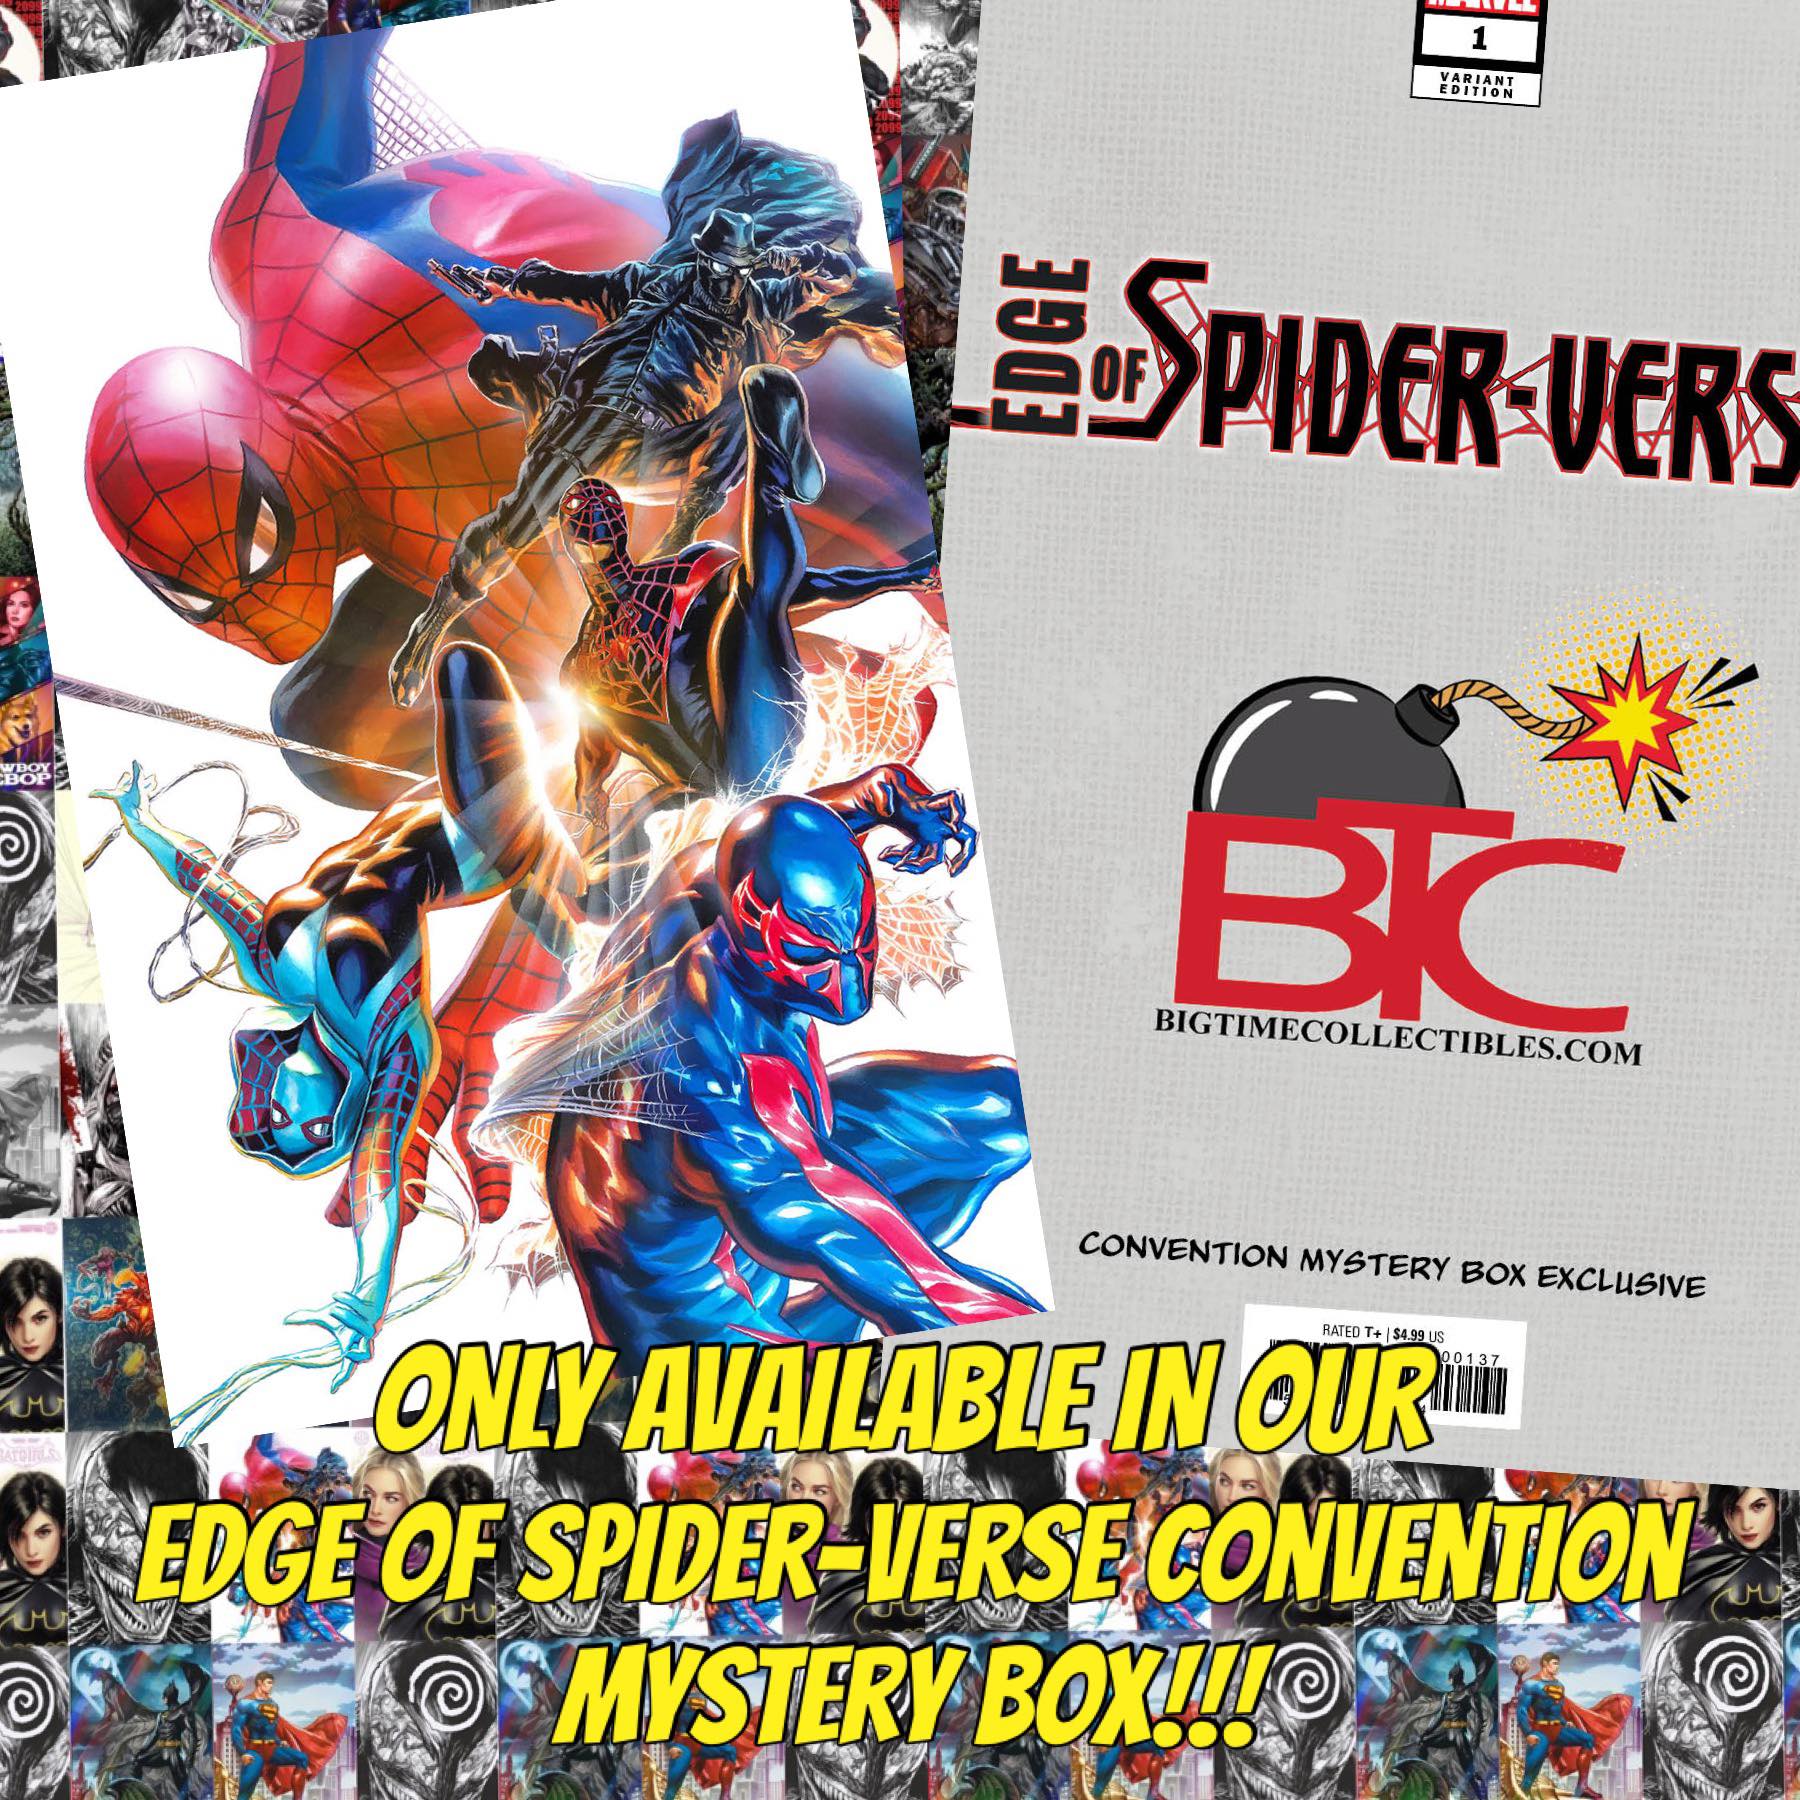 EDGE OF SPIDER-VERSE CONVENTION MYSTERY BOX